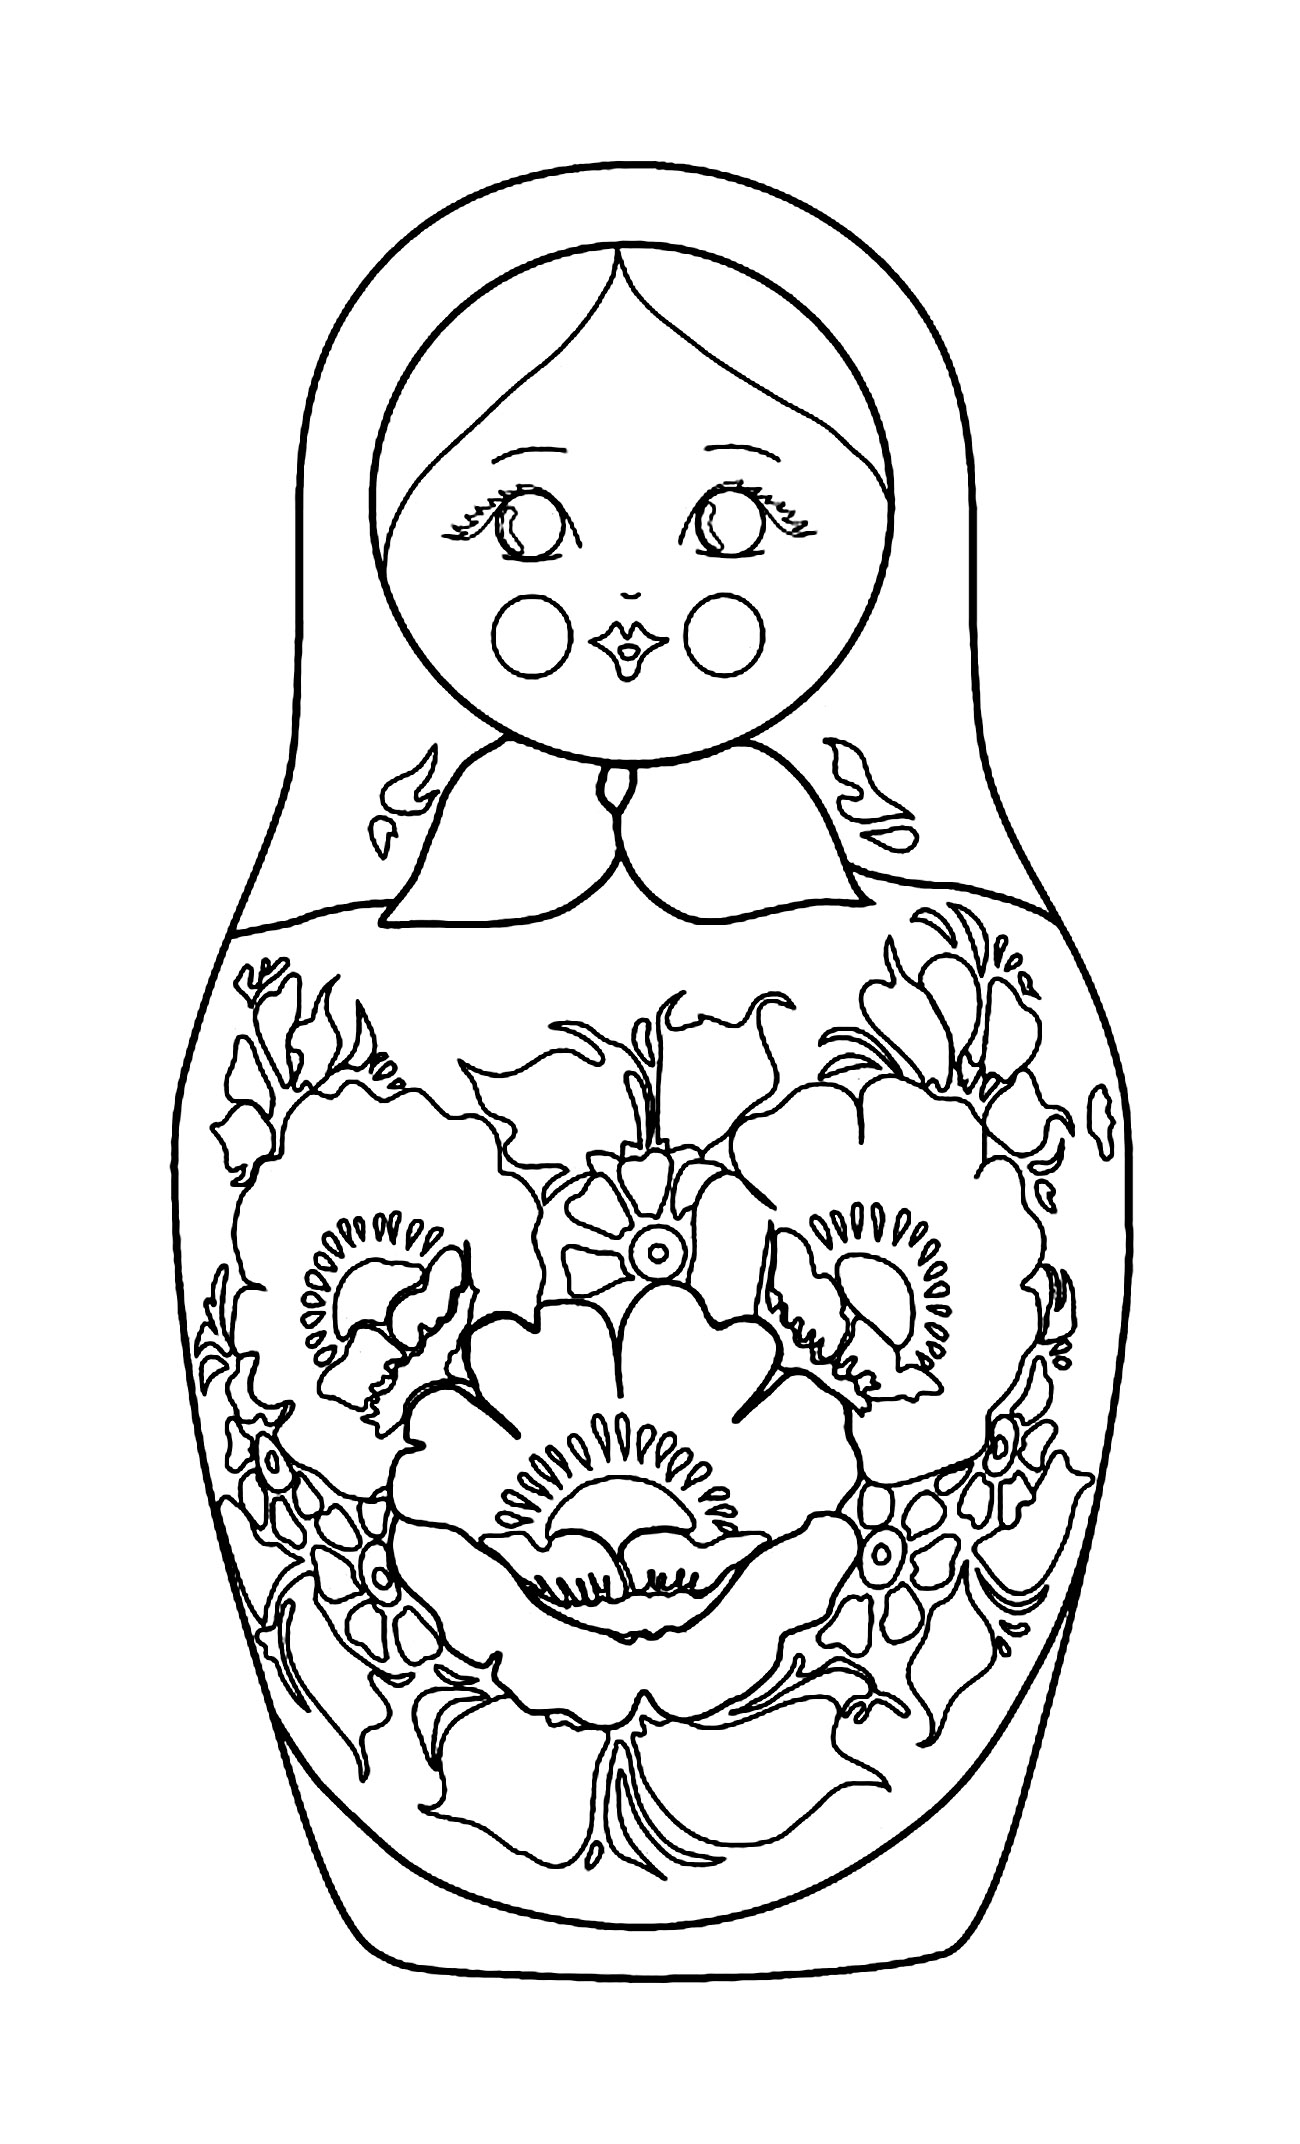 Color this Russian doll and her flowered patterns